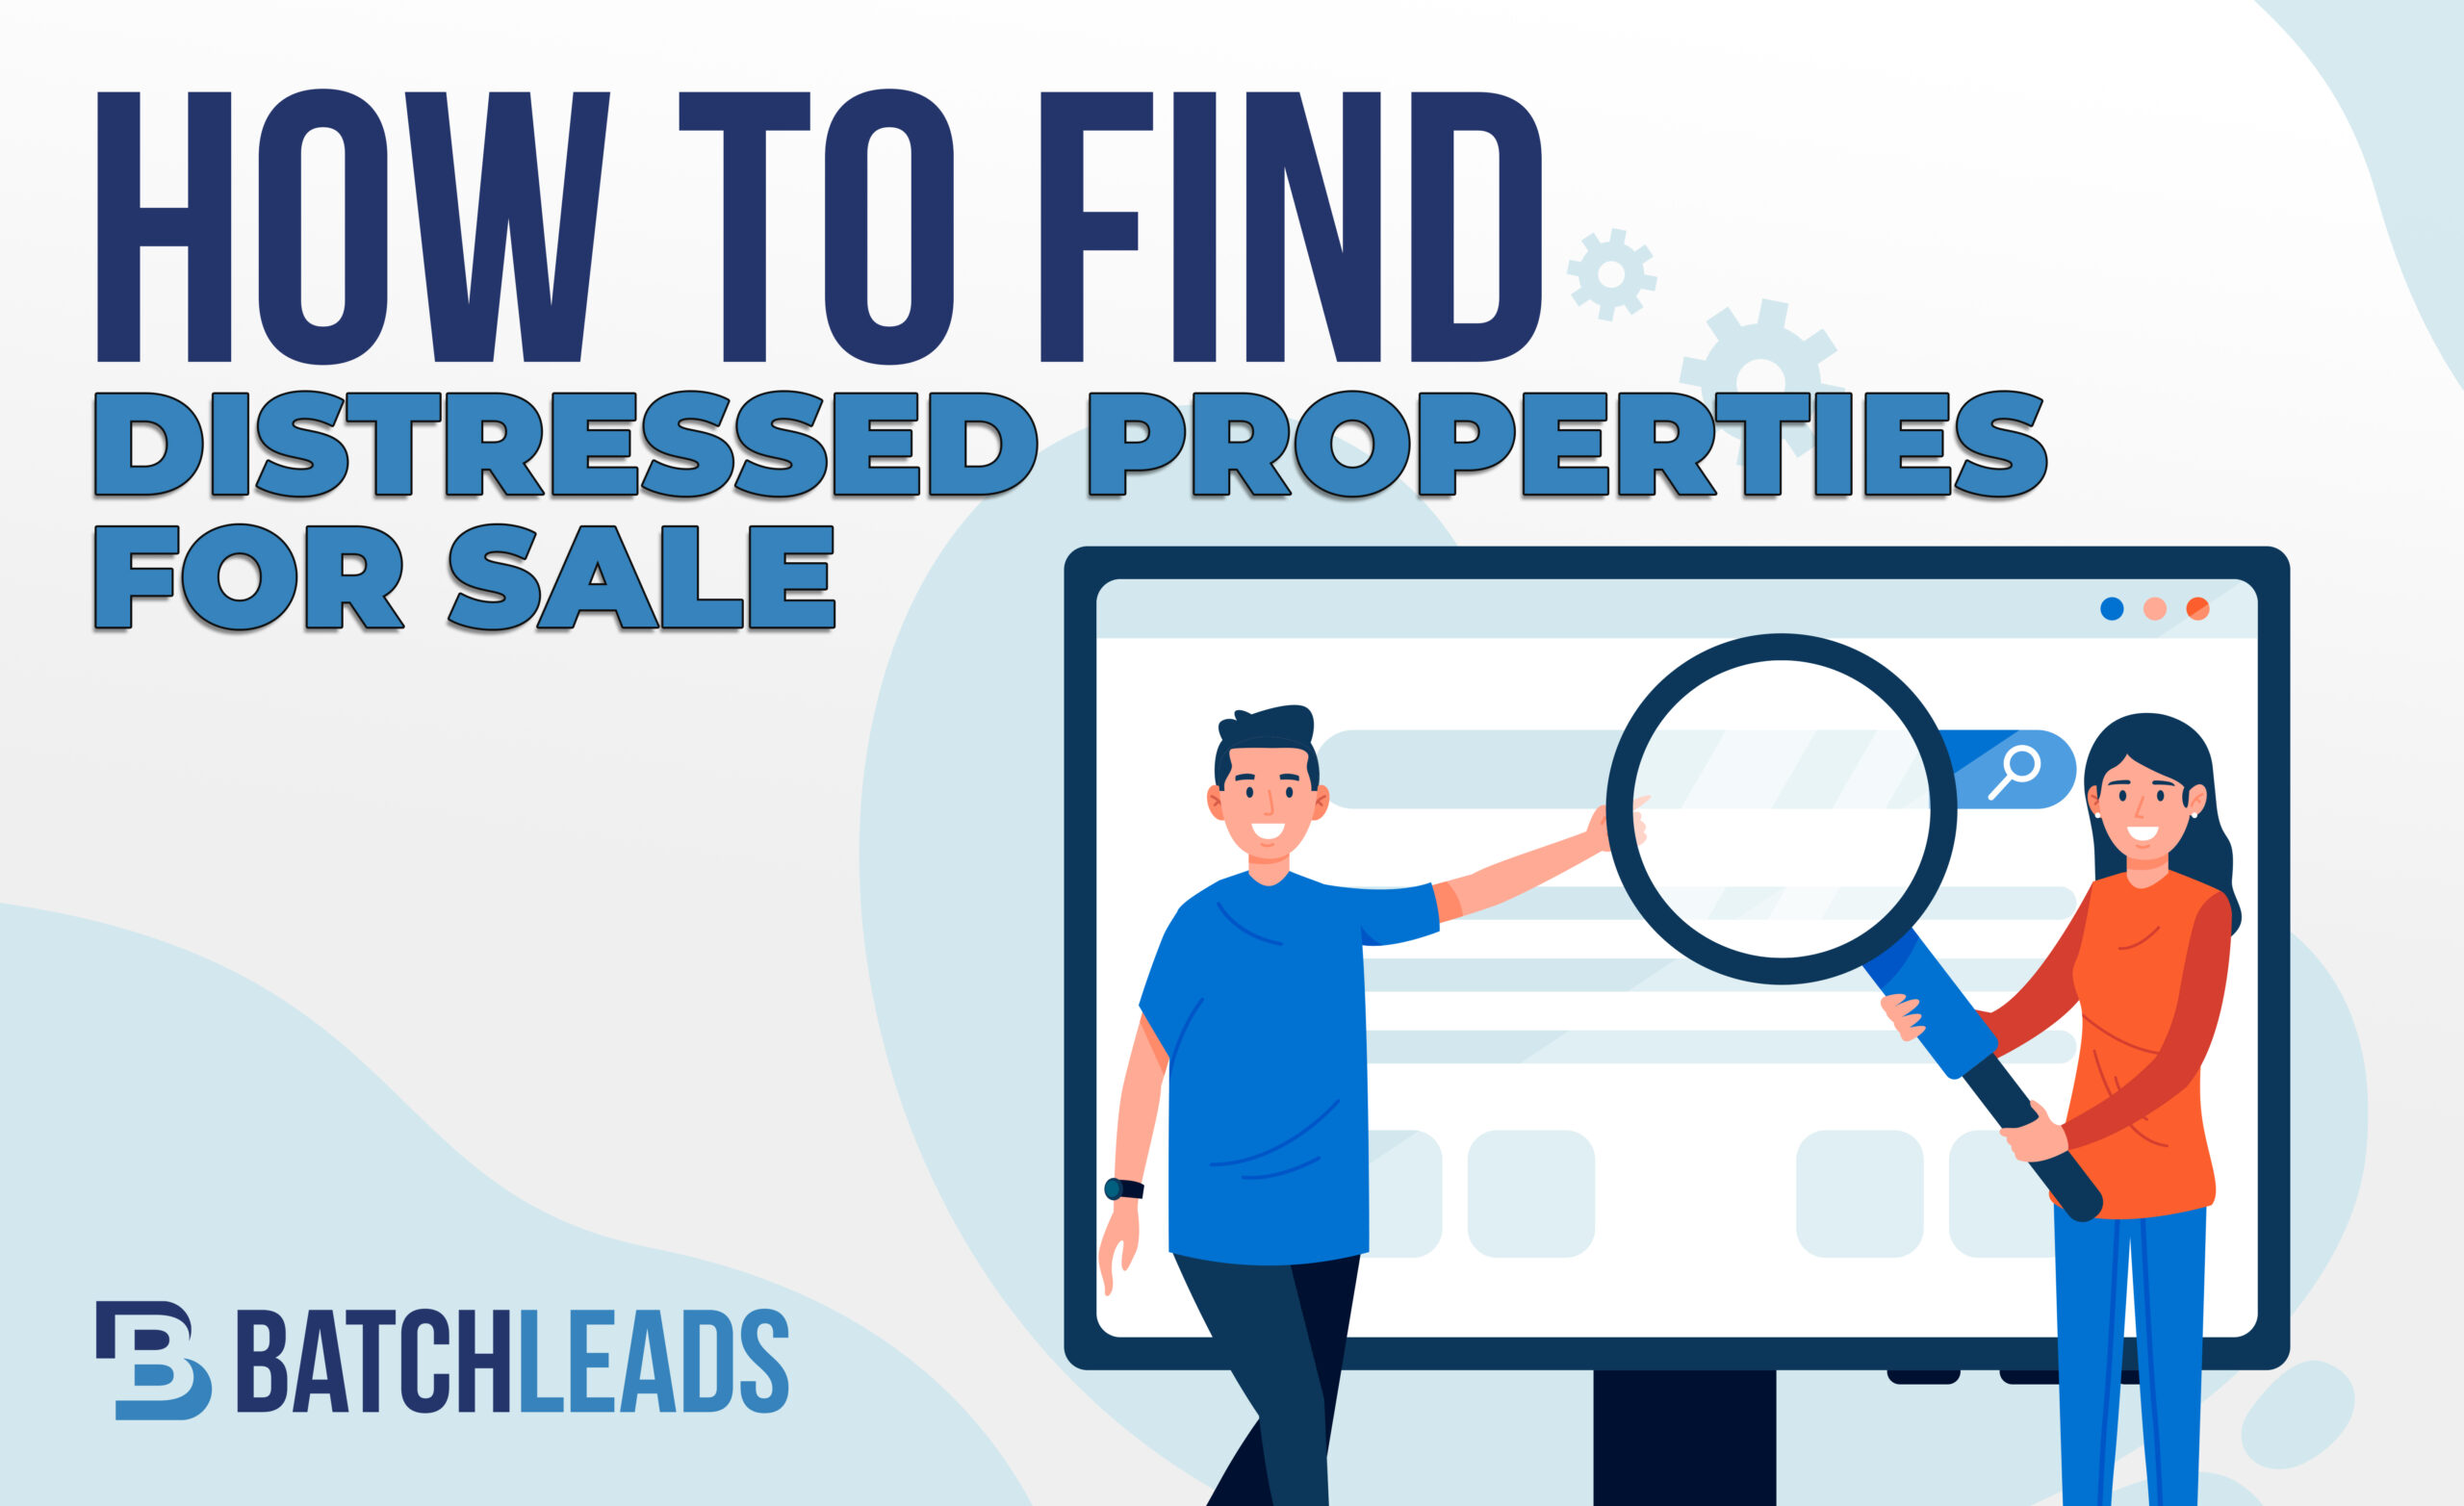 How To Find Distressed Properties For Sale